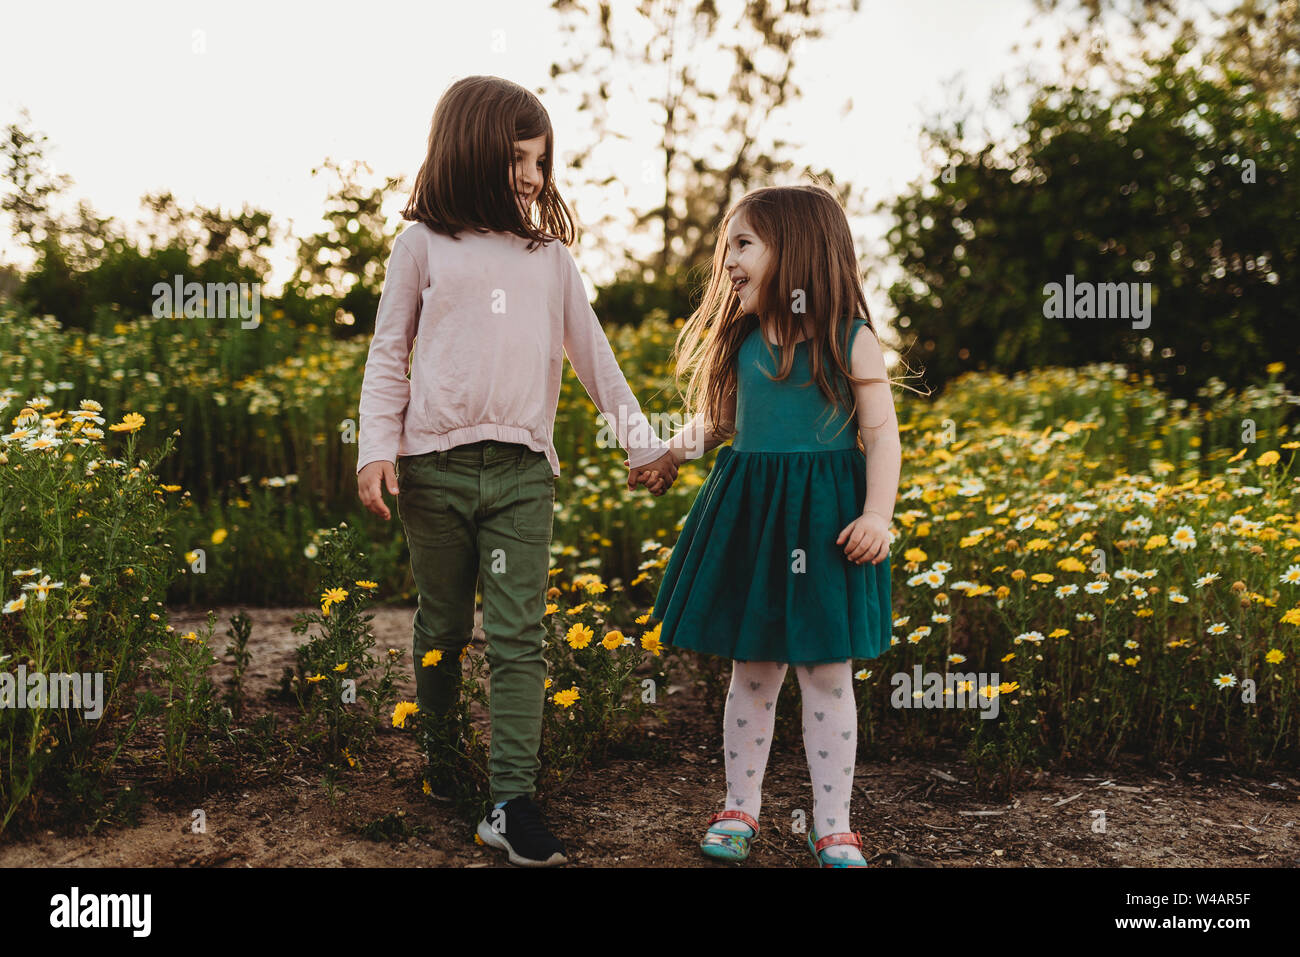 Smiling sisters walking through a field of flowers in spring Stock Photo